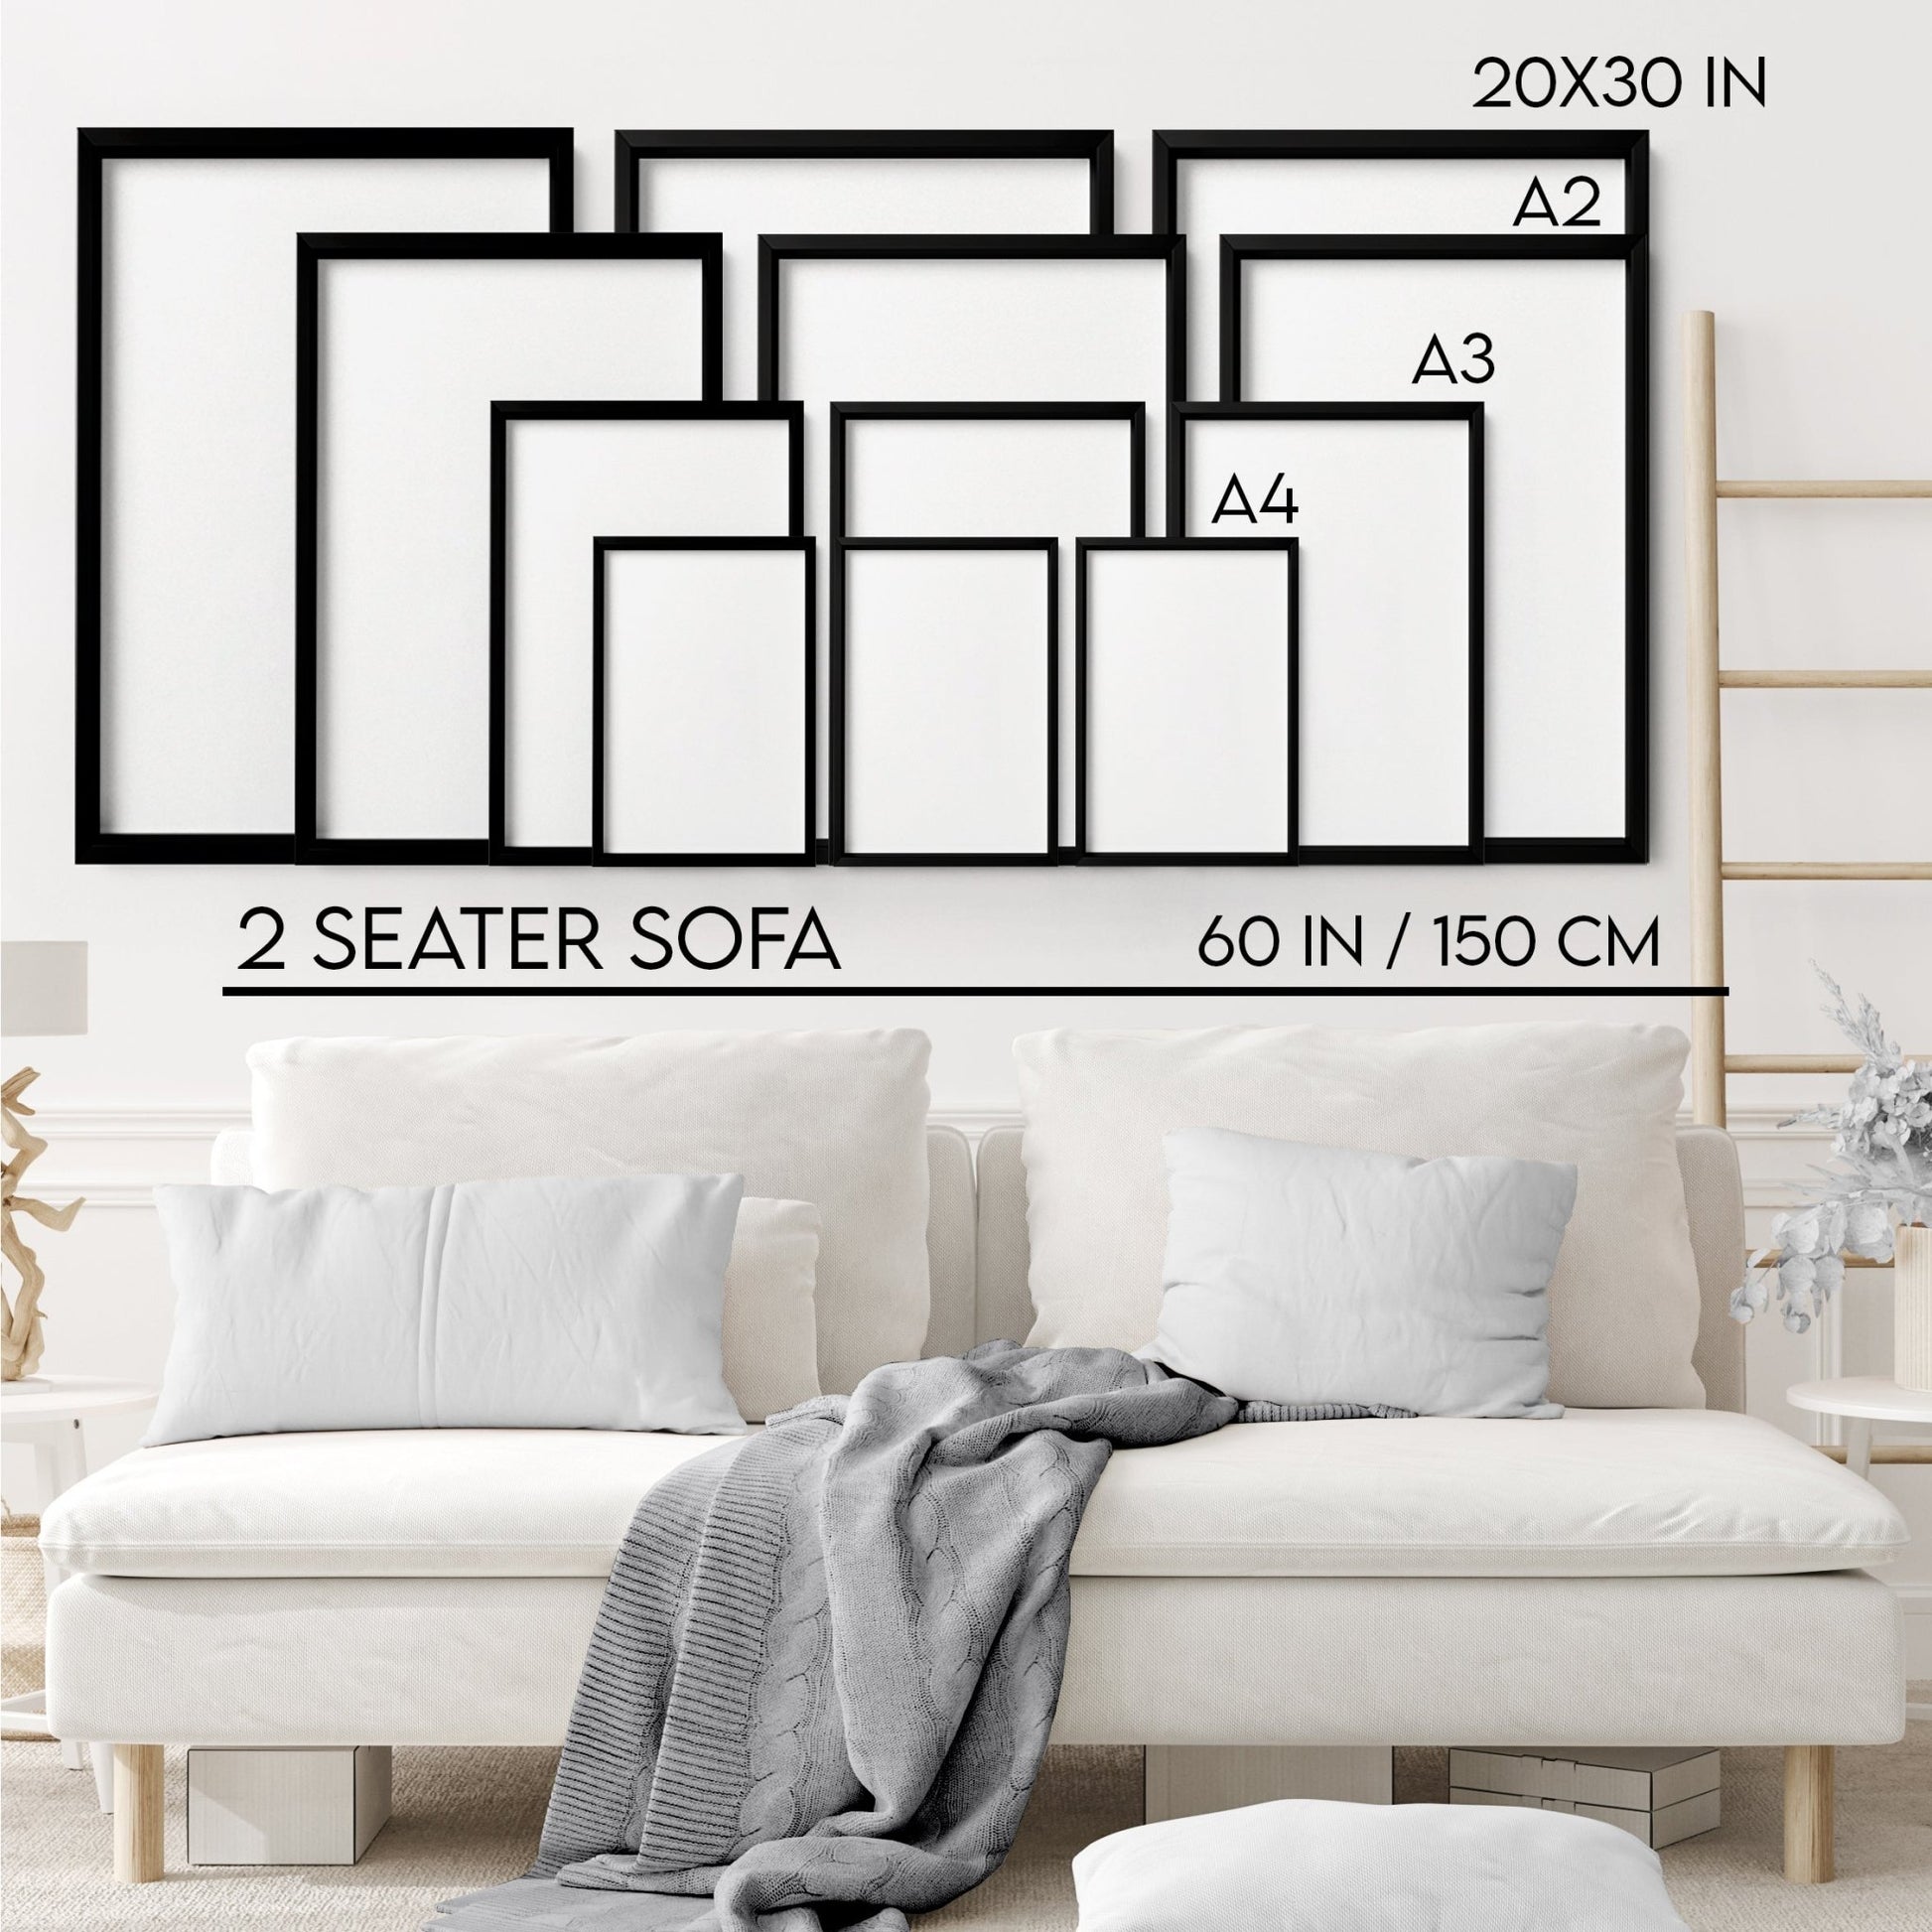 Large living room picture | set of 3 wall art prints